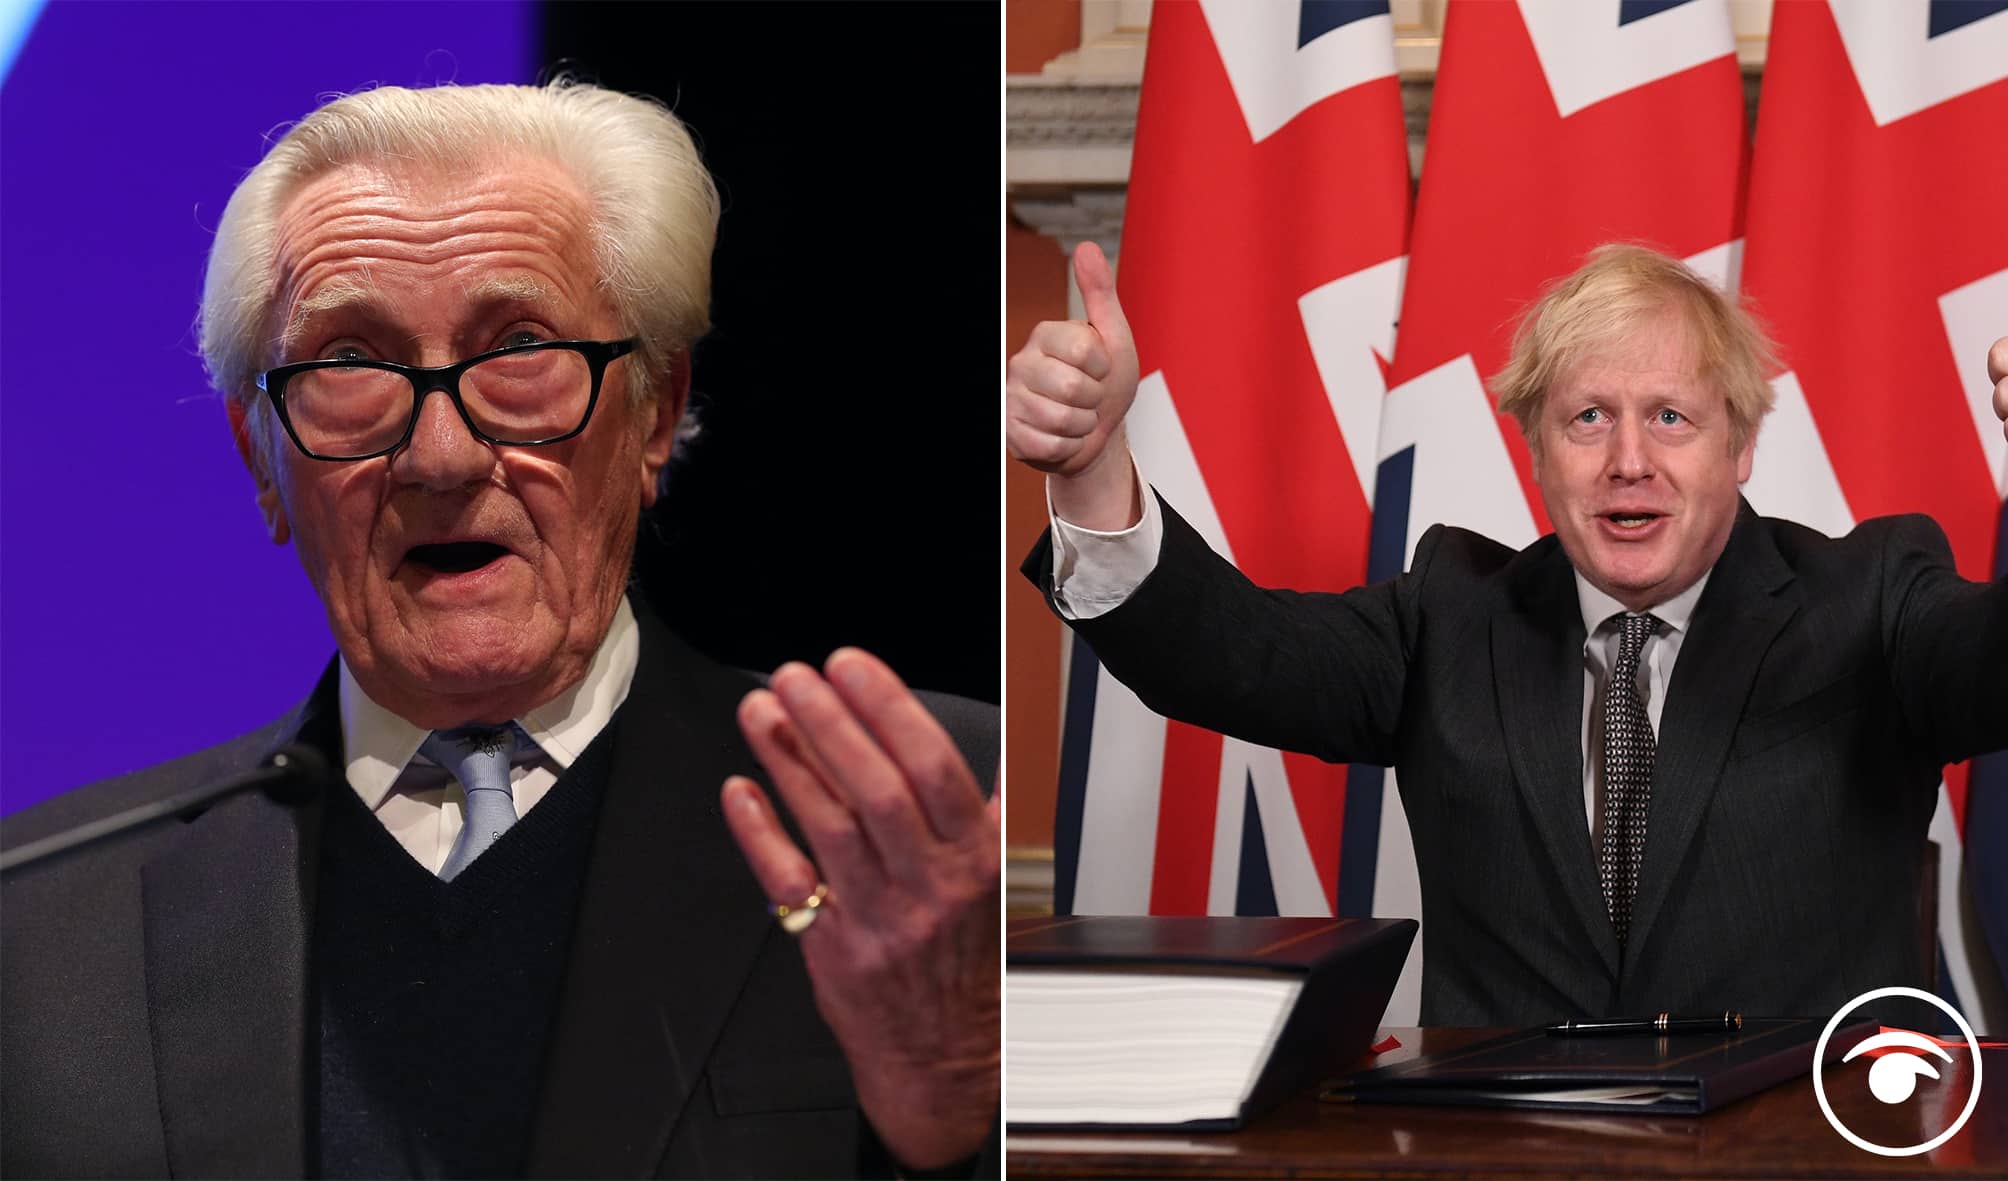 Brexit: ‘Of course we must fight back’ and ‘we are not going to lie down’ says Heseltine